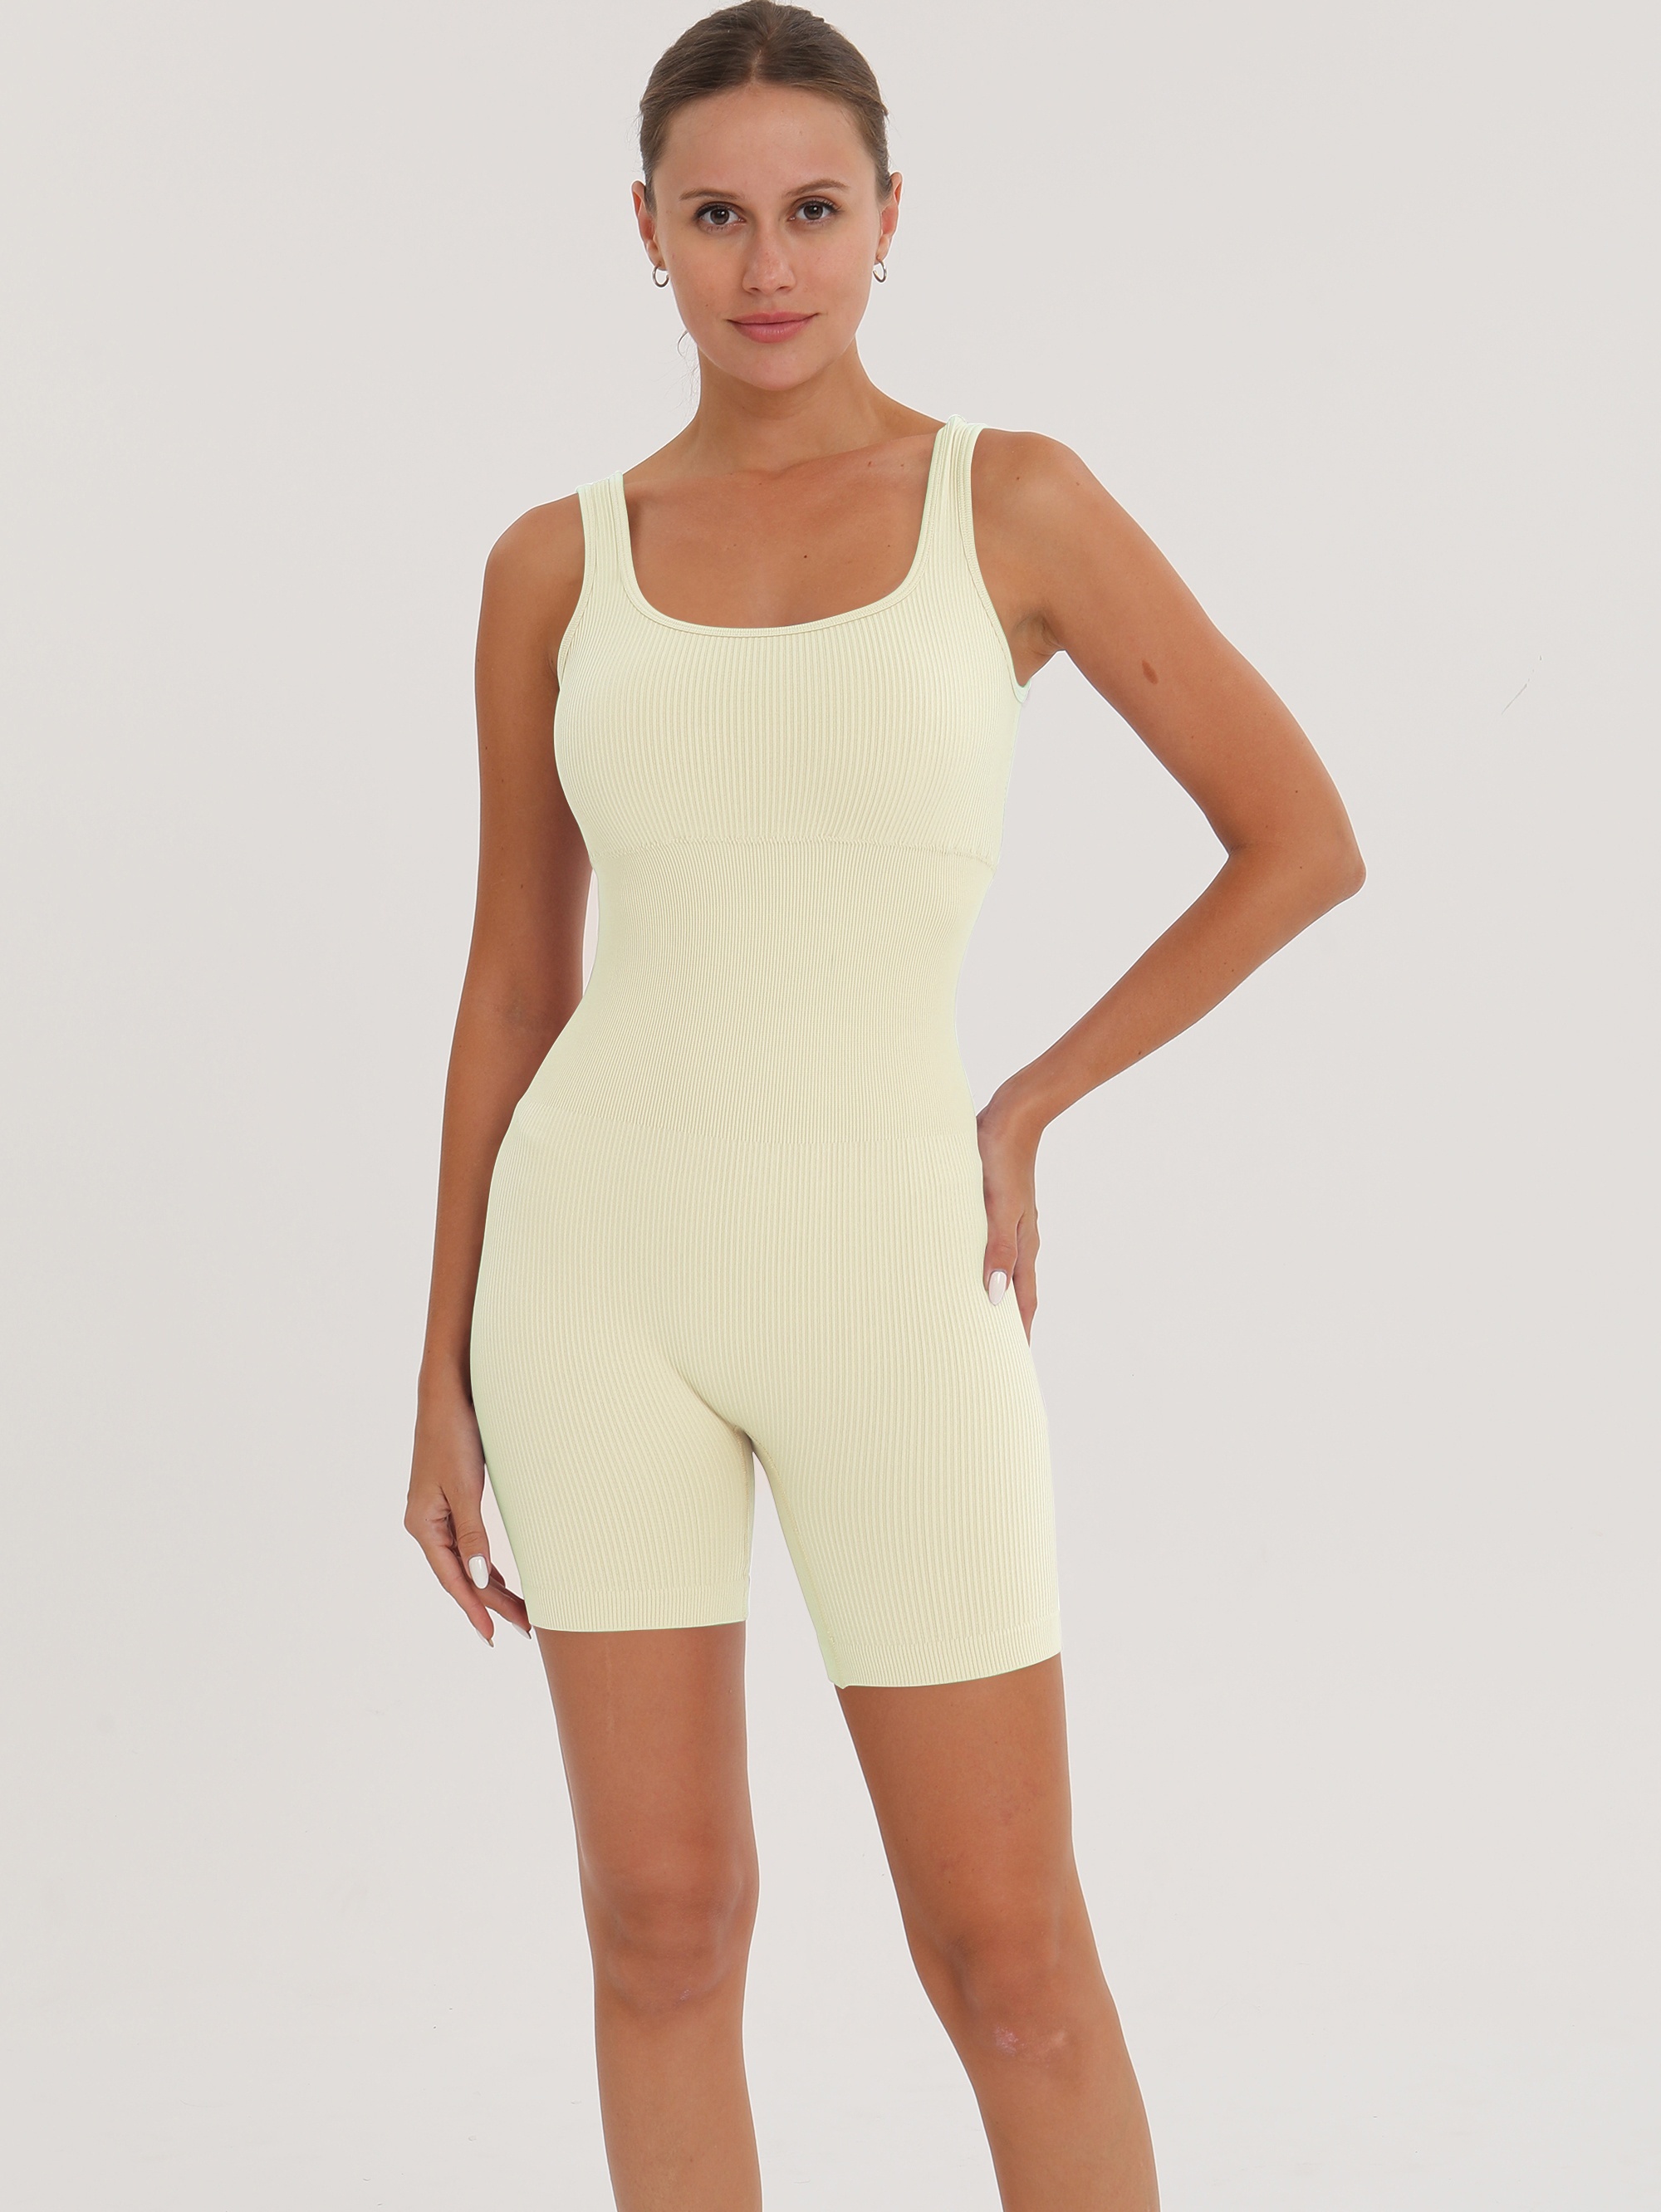 Women's Yoga Rompers Workout Ribbed Long Sleeve Square Neck Sports